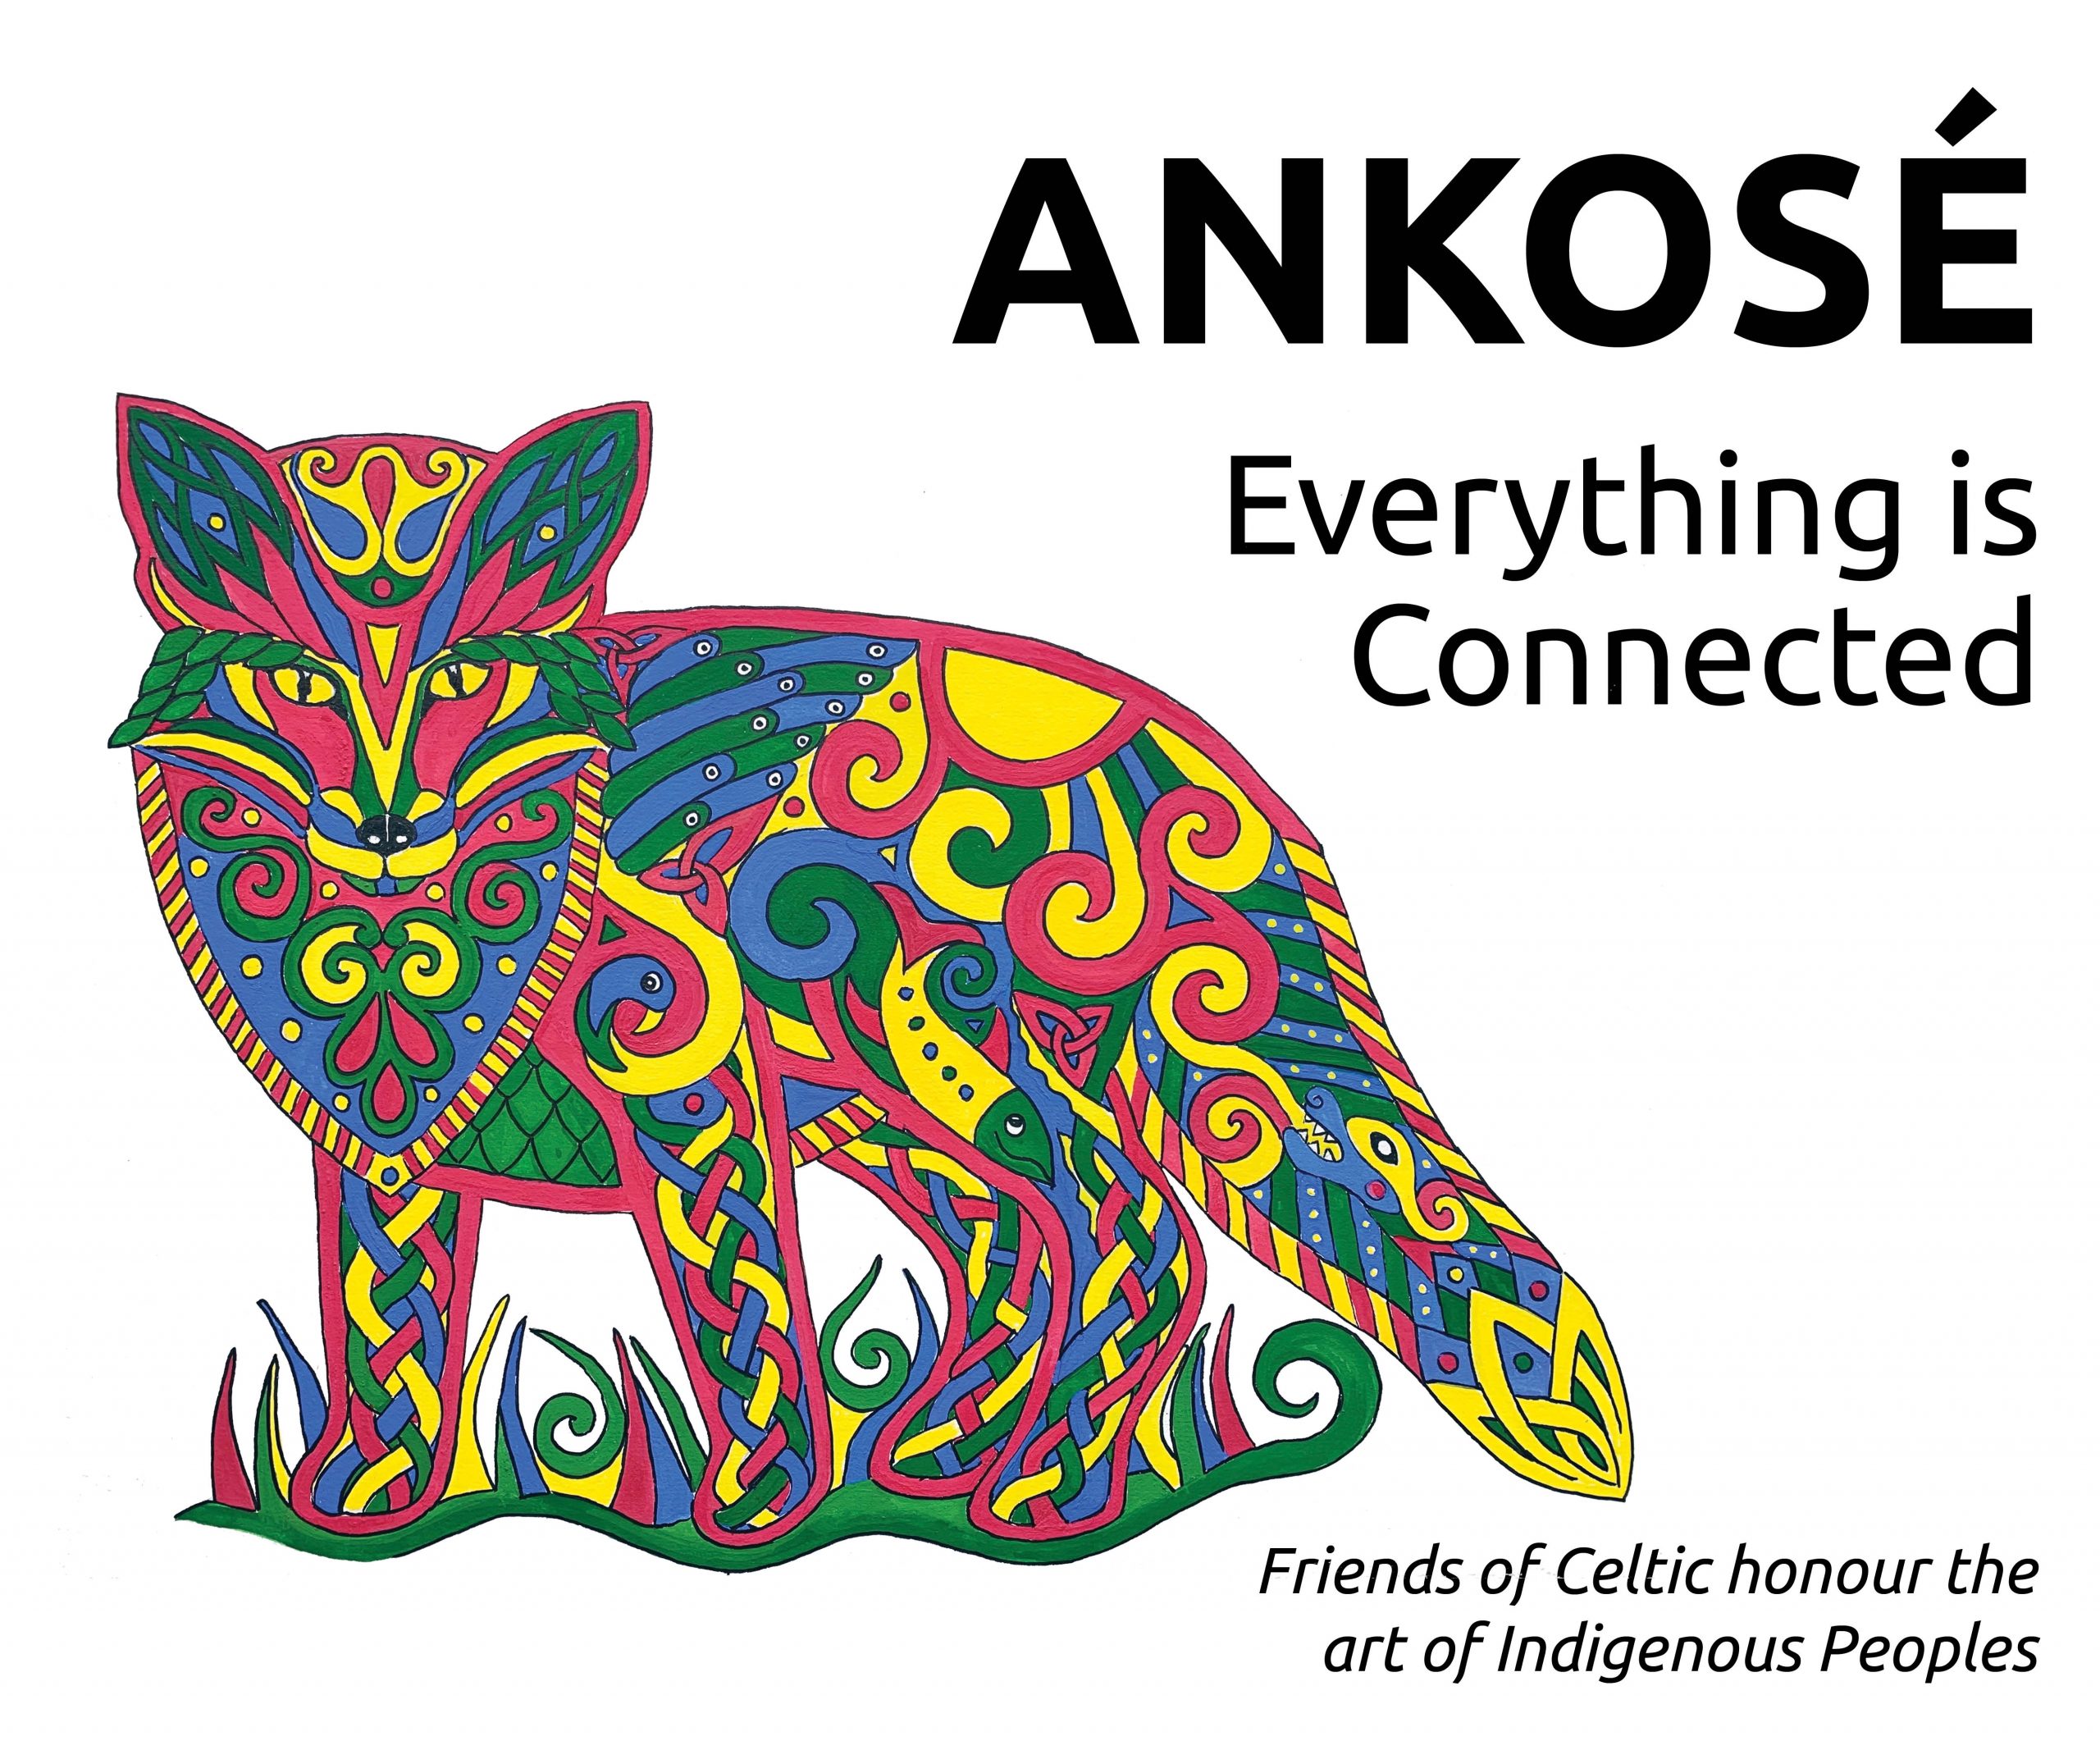 Illustration of Celtic Fox with text Ankose: Everything is Connected